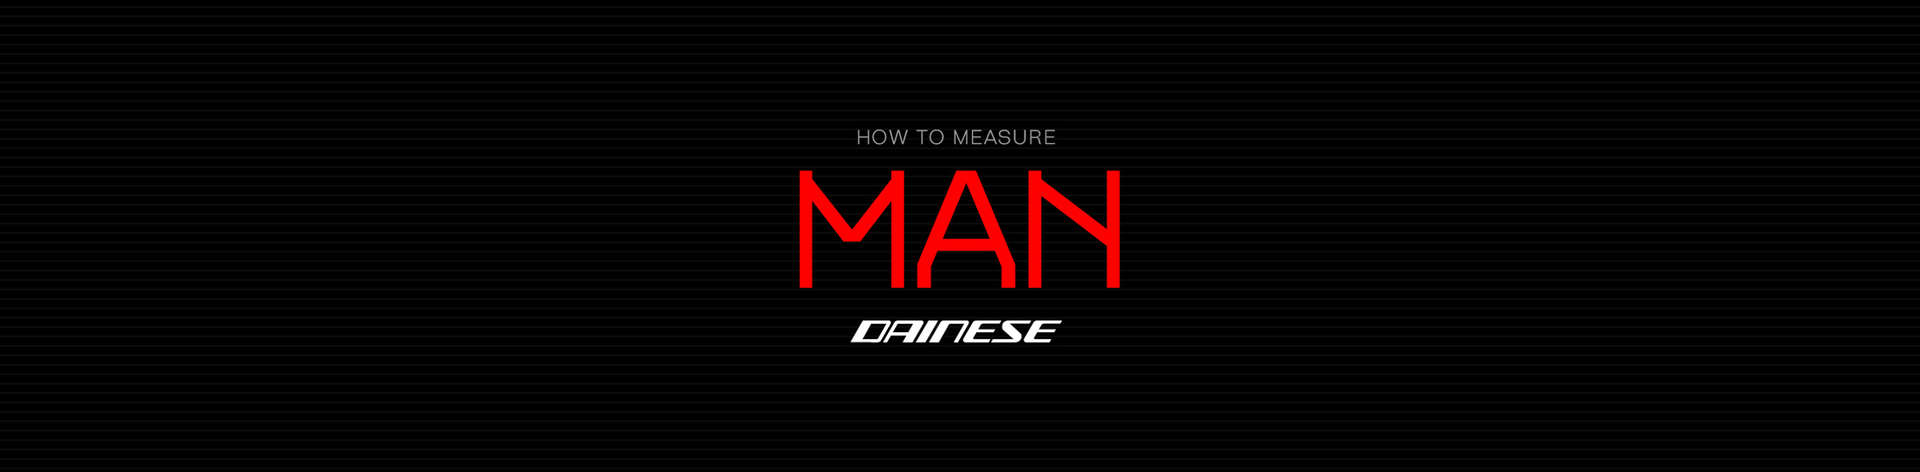 How to measure MAN